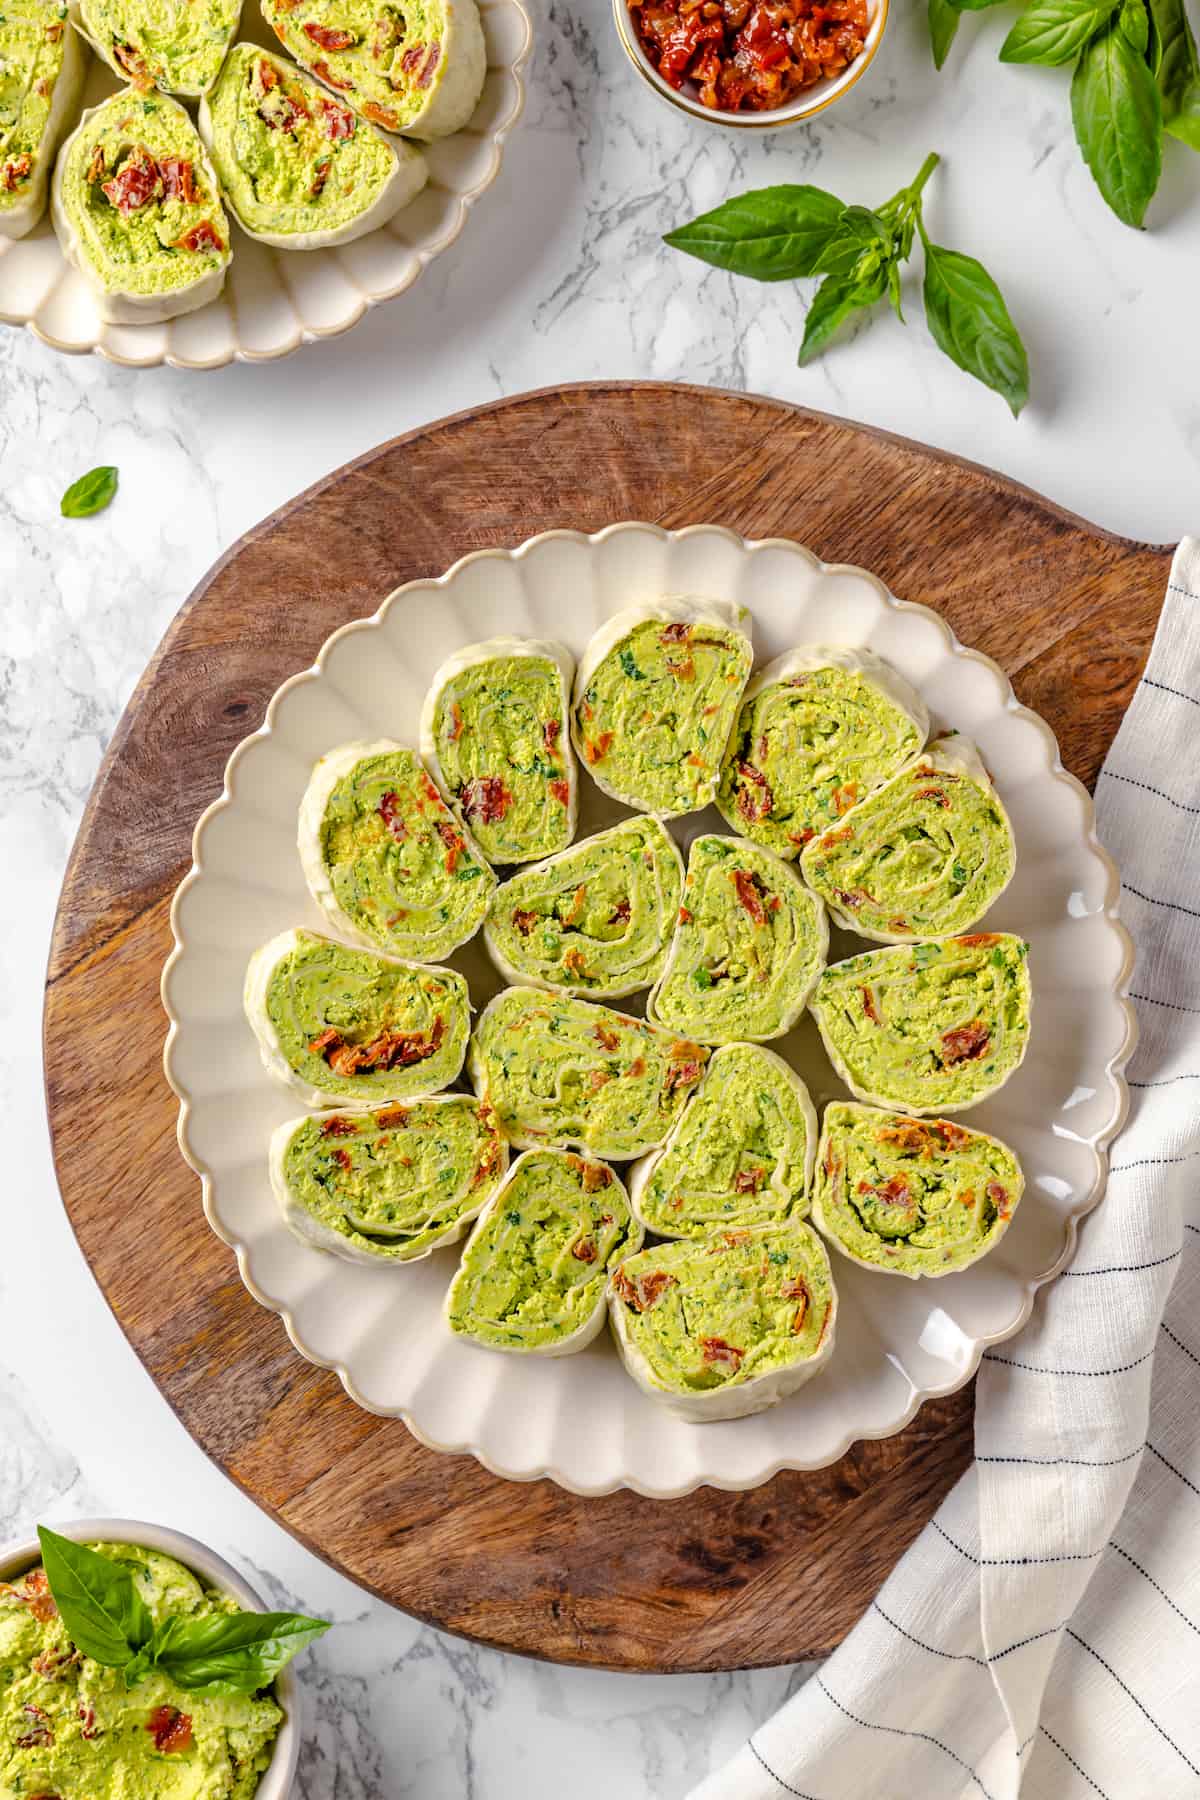 Overhead view of vegan tortilla roll-ups with pesto and cream cheese